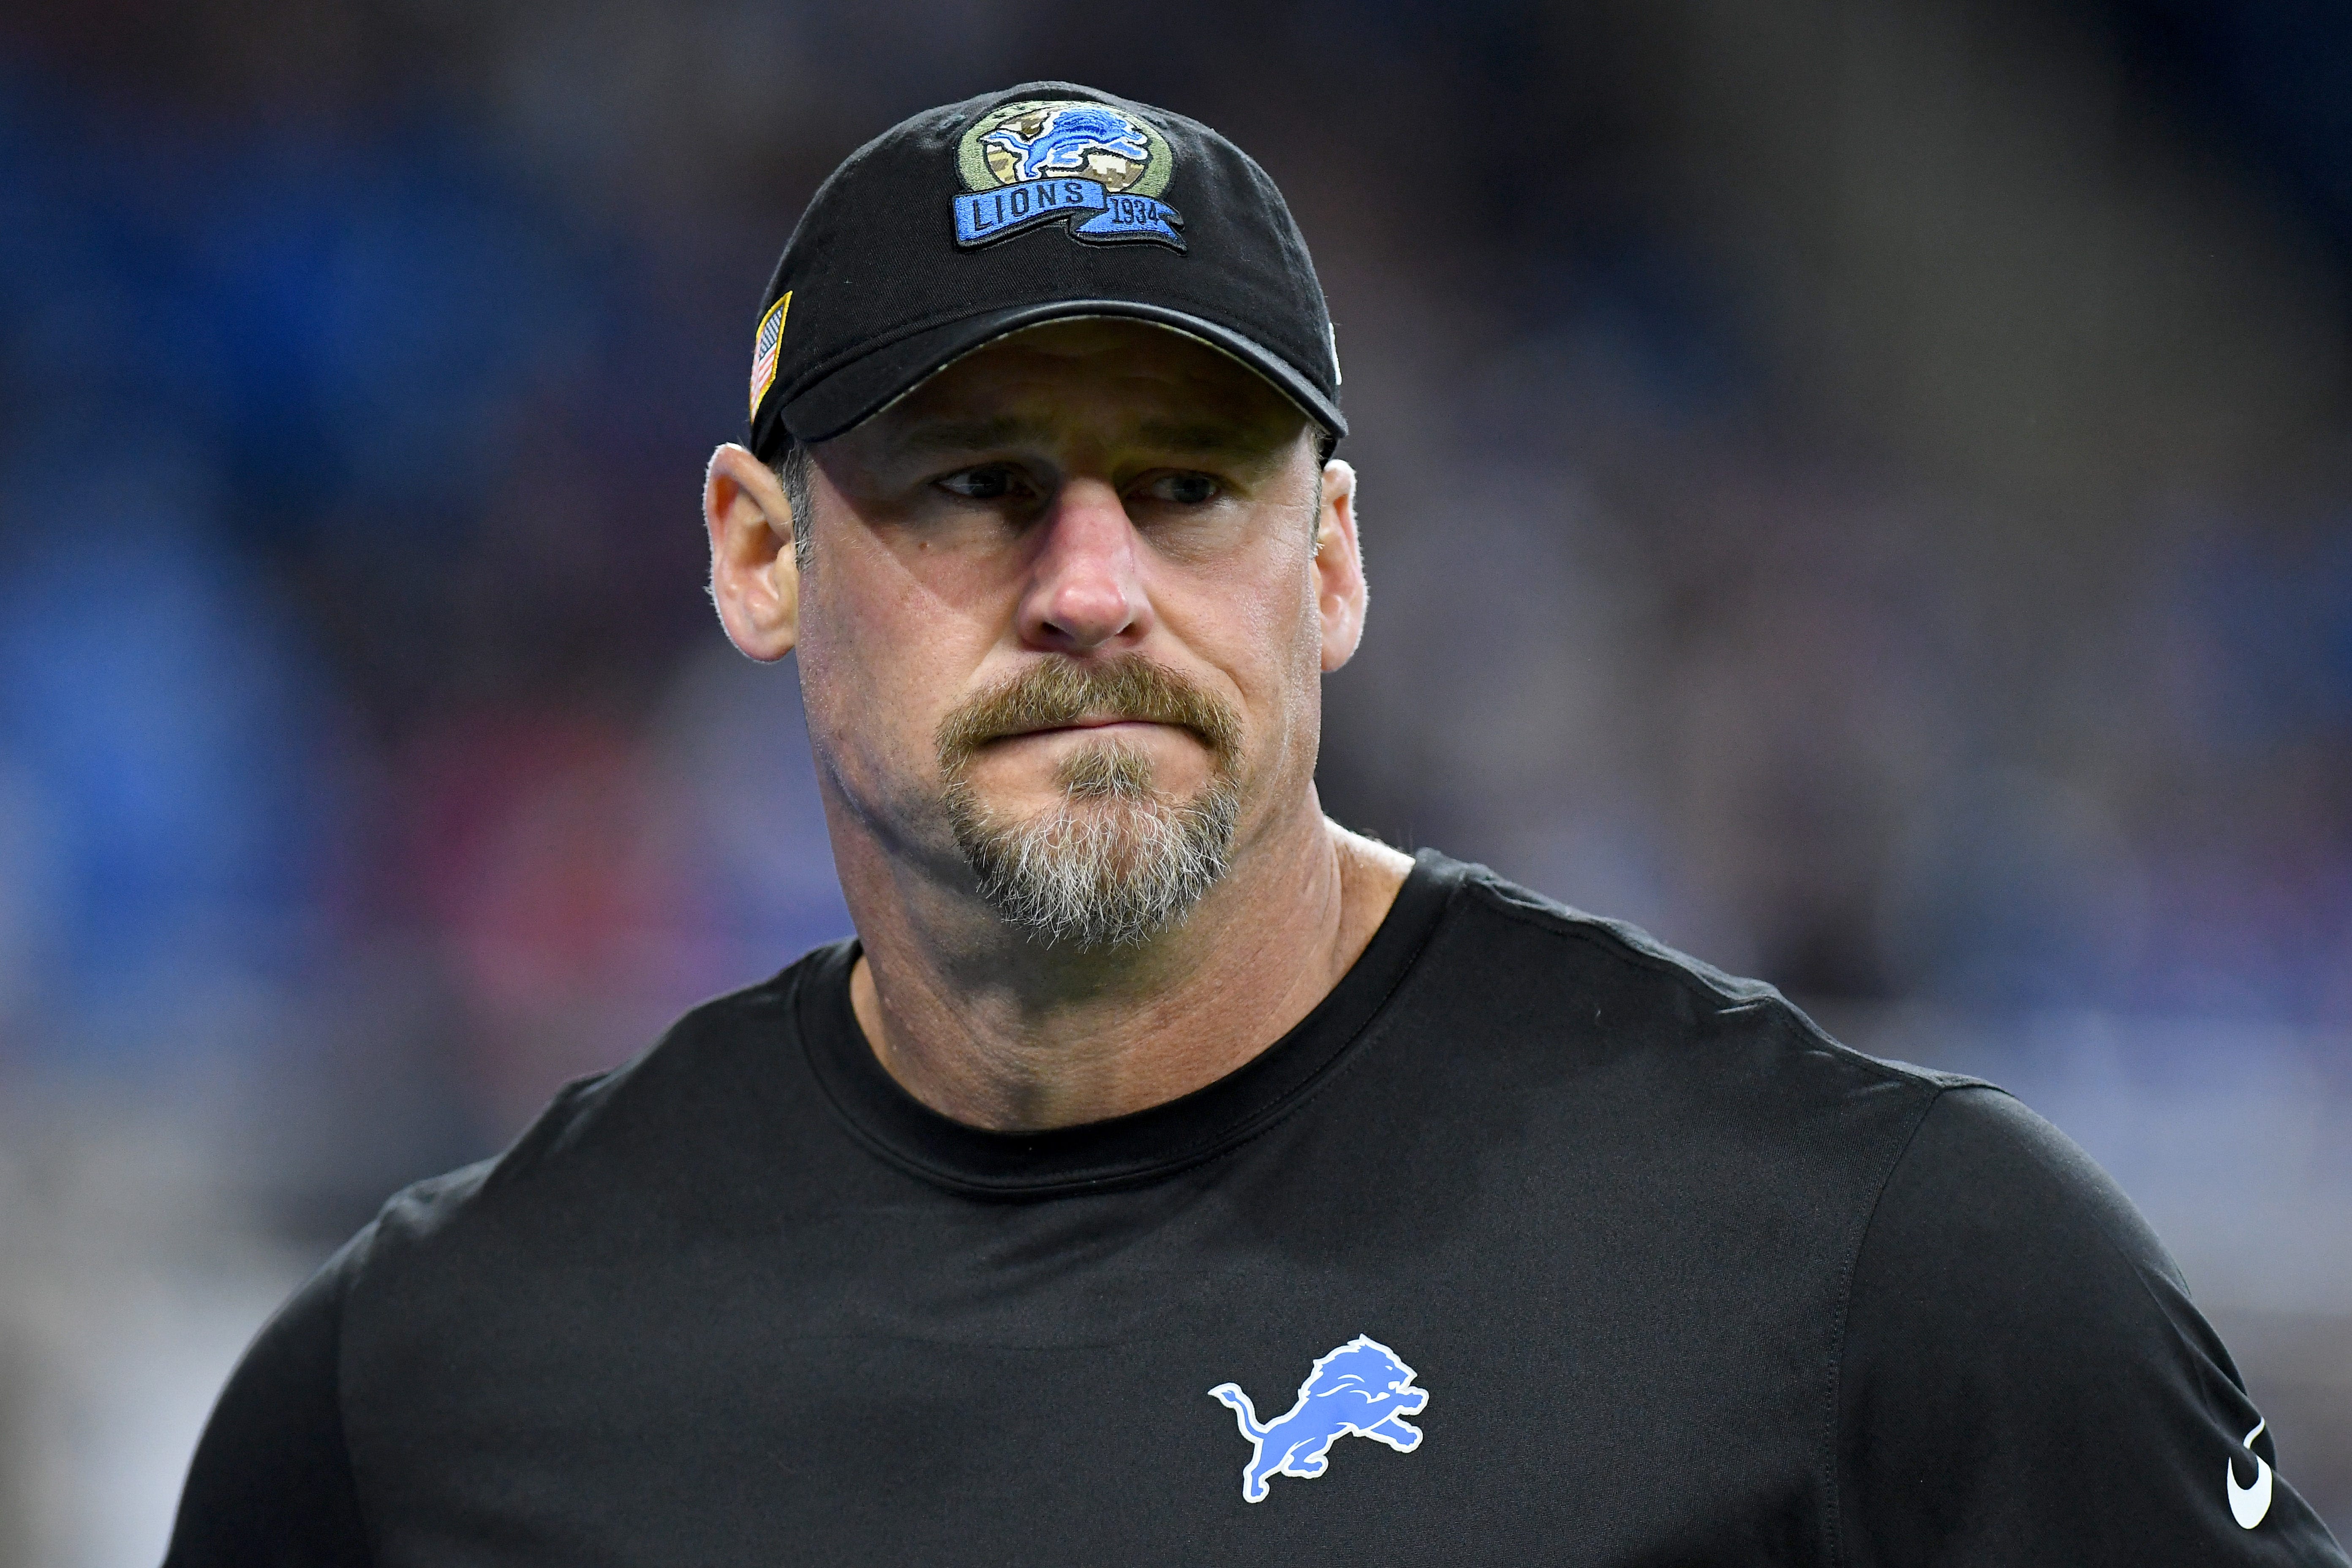 'You're the enemy,' Lions coach Dan Campbell criticizes Schlossnagle's exit from Texas A&M